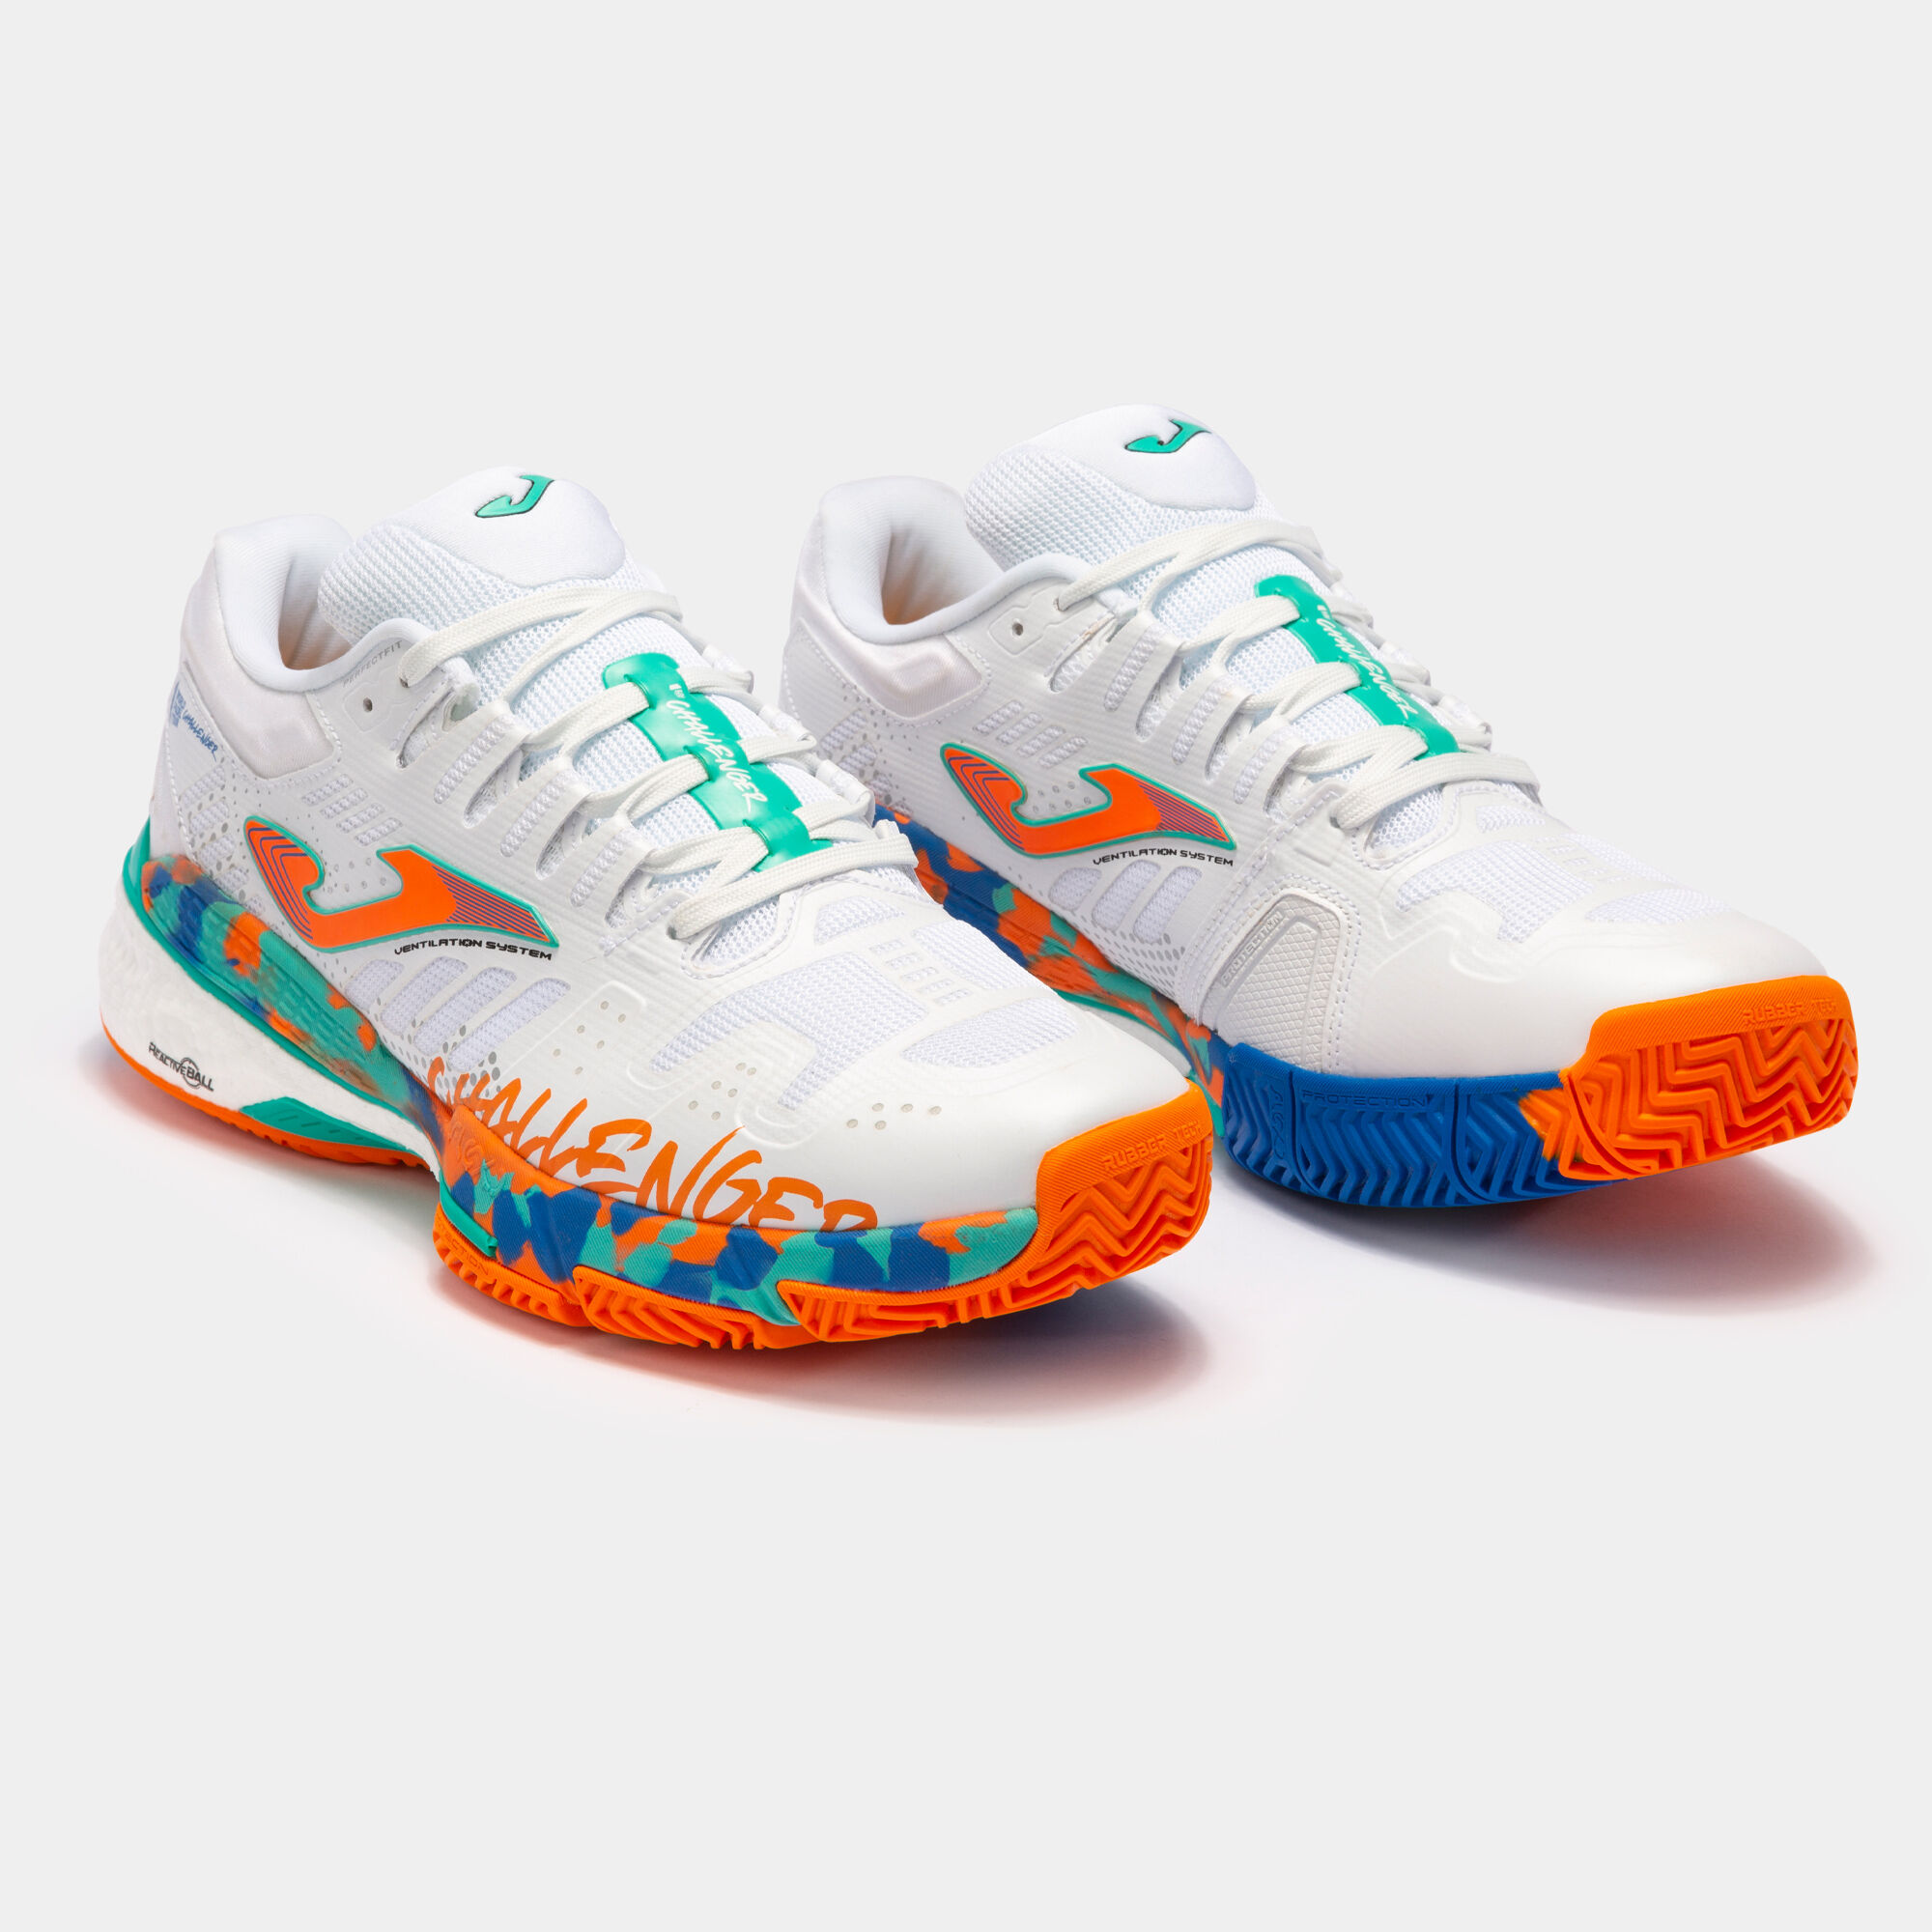 SHOES SLAM MEN 21 WPT - CHALLENGER CLAY MAN WHITE TURQUOISE